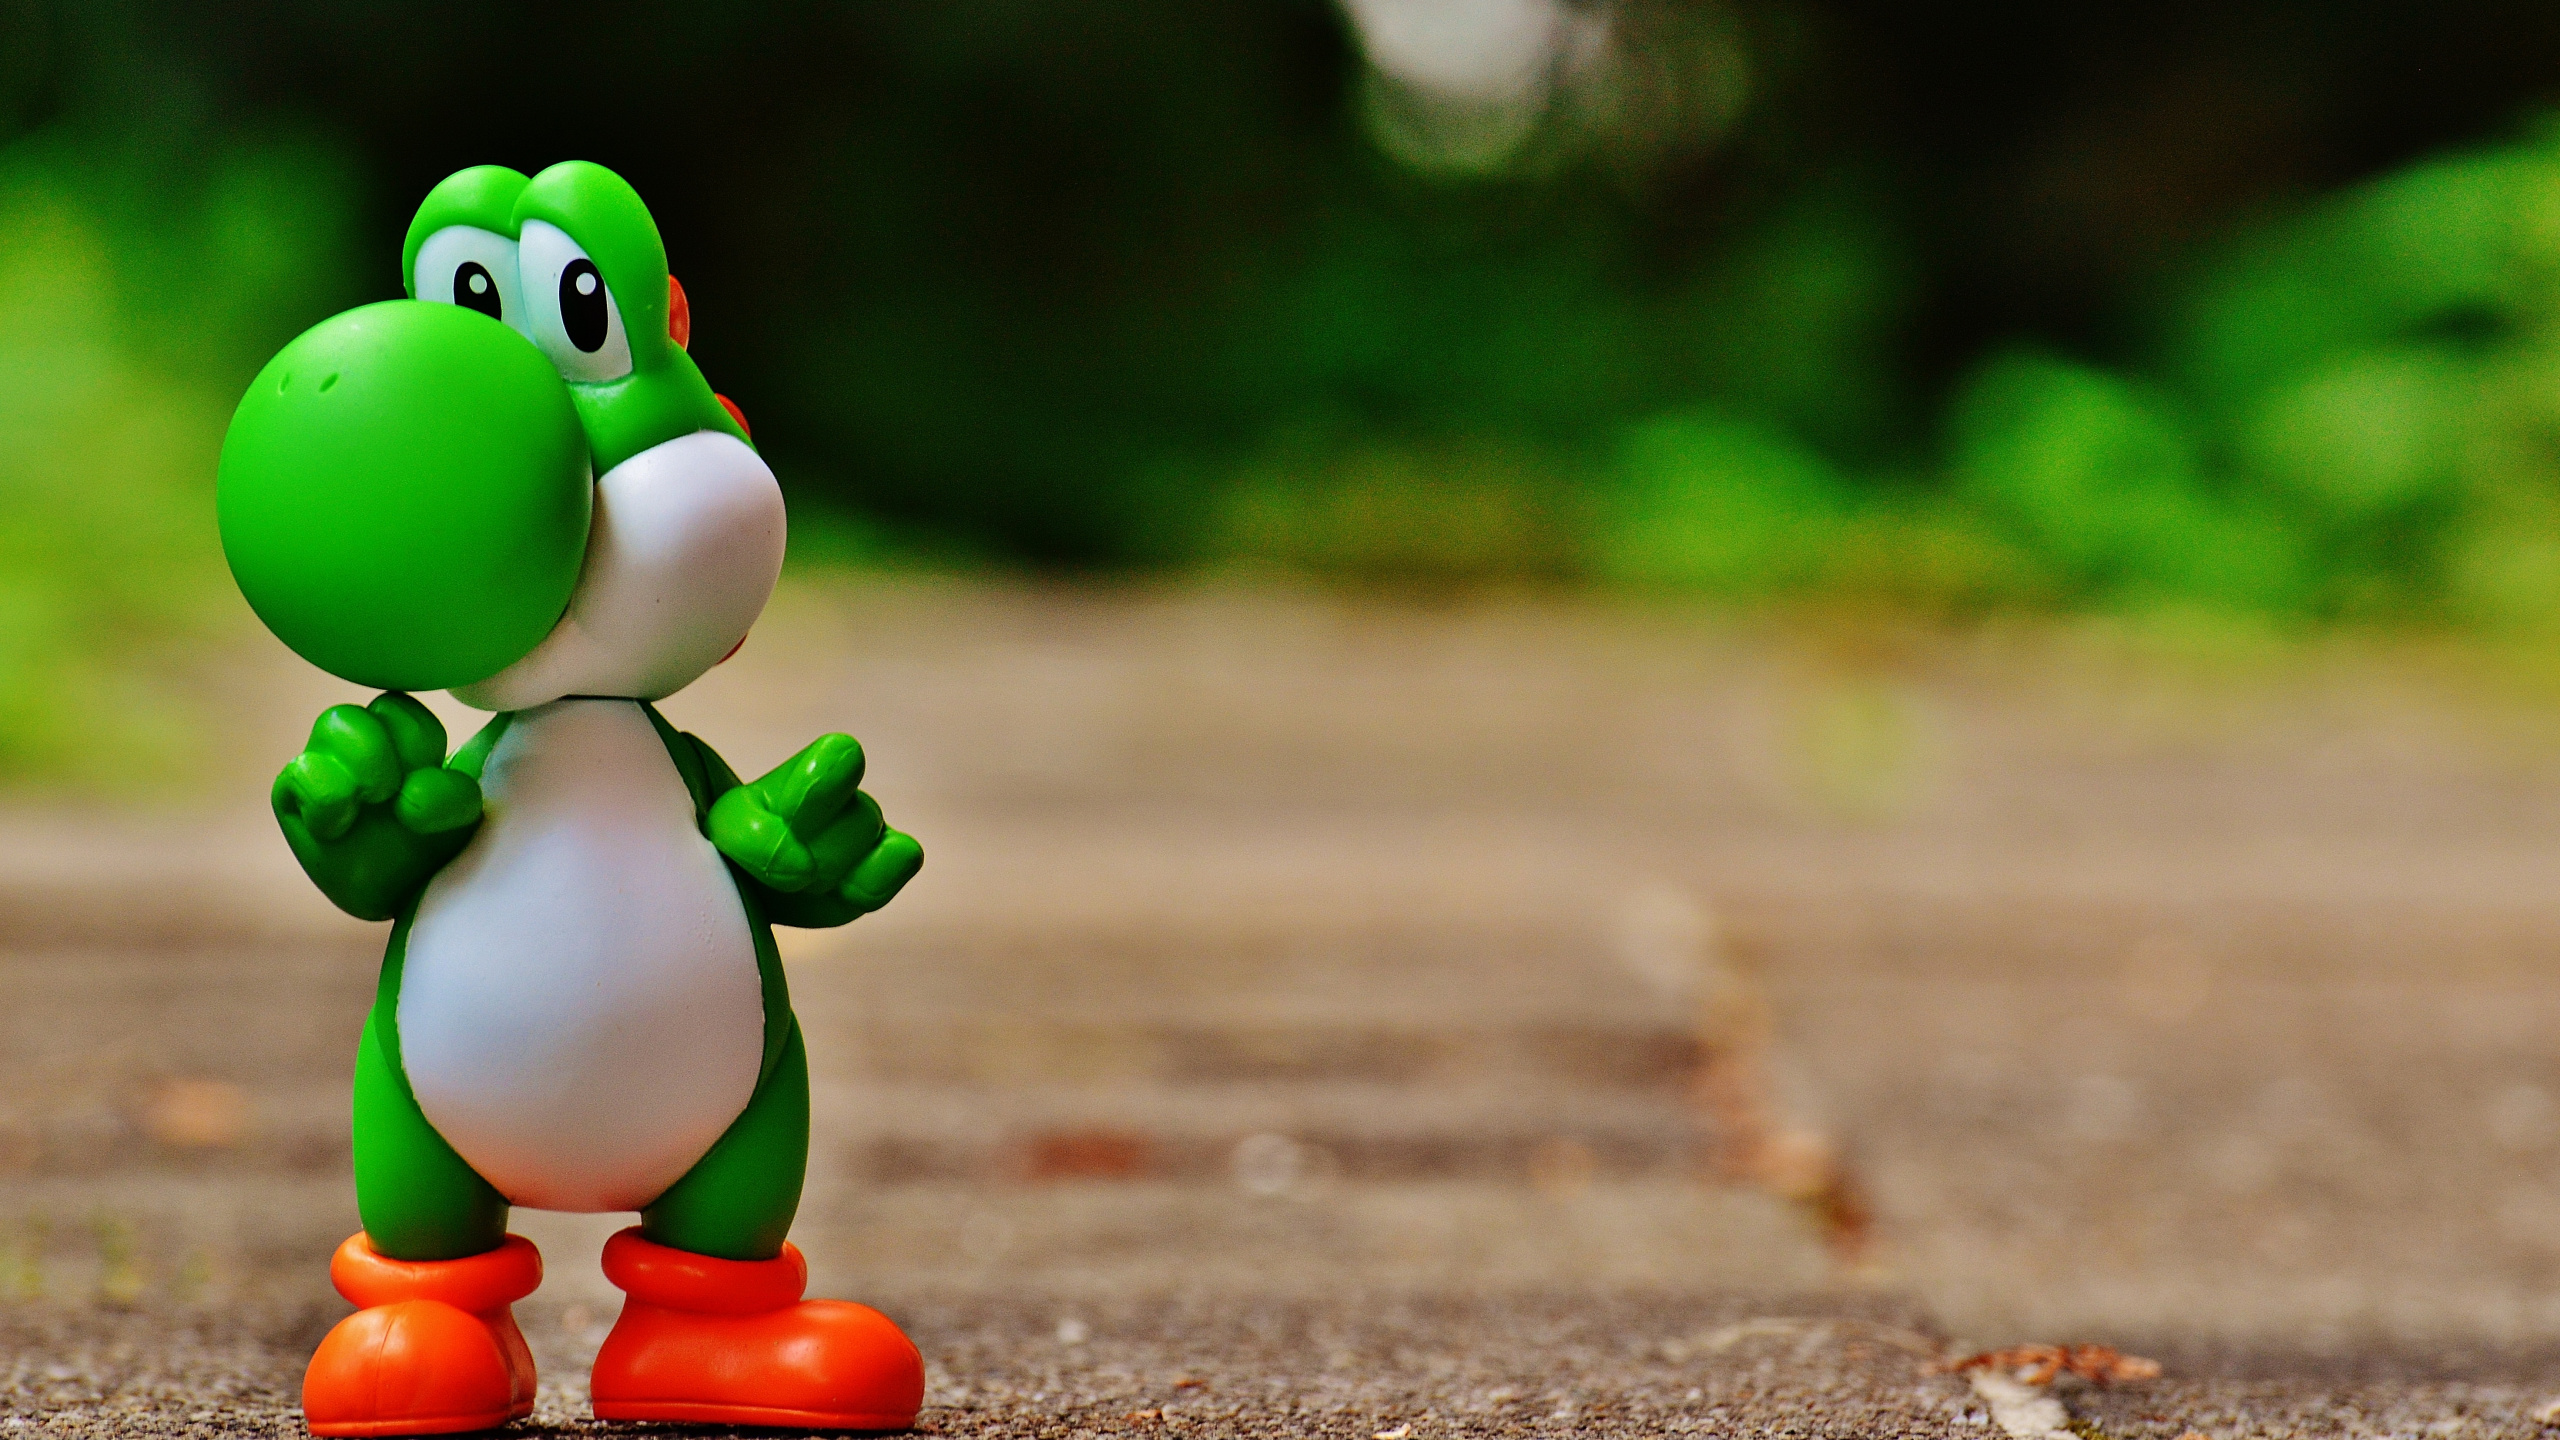 Yoshis Island, Super Mario World, Green, Toy, Action Figure. Wallpaper in 2560x1440 Resolution